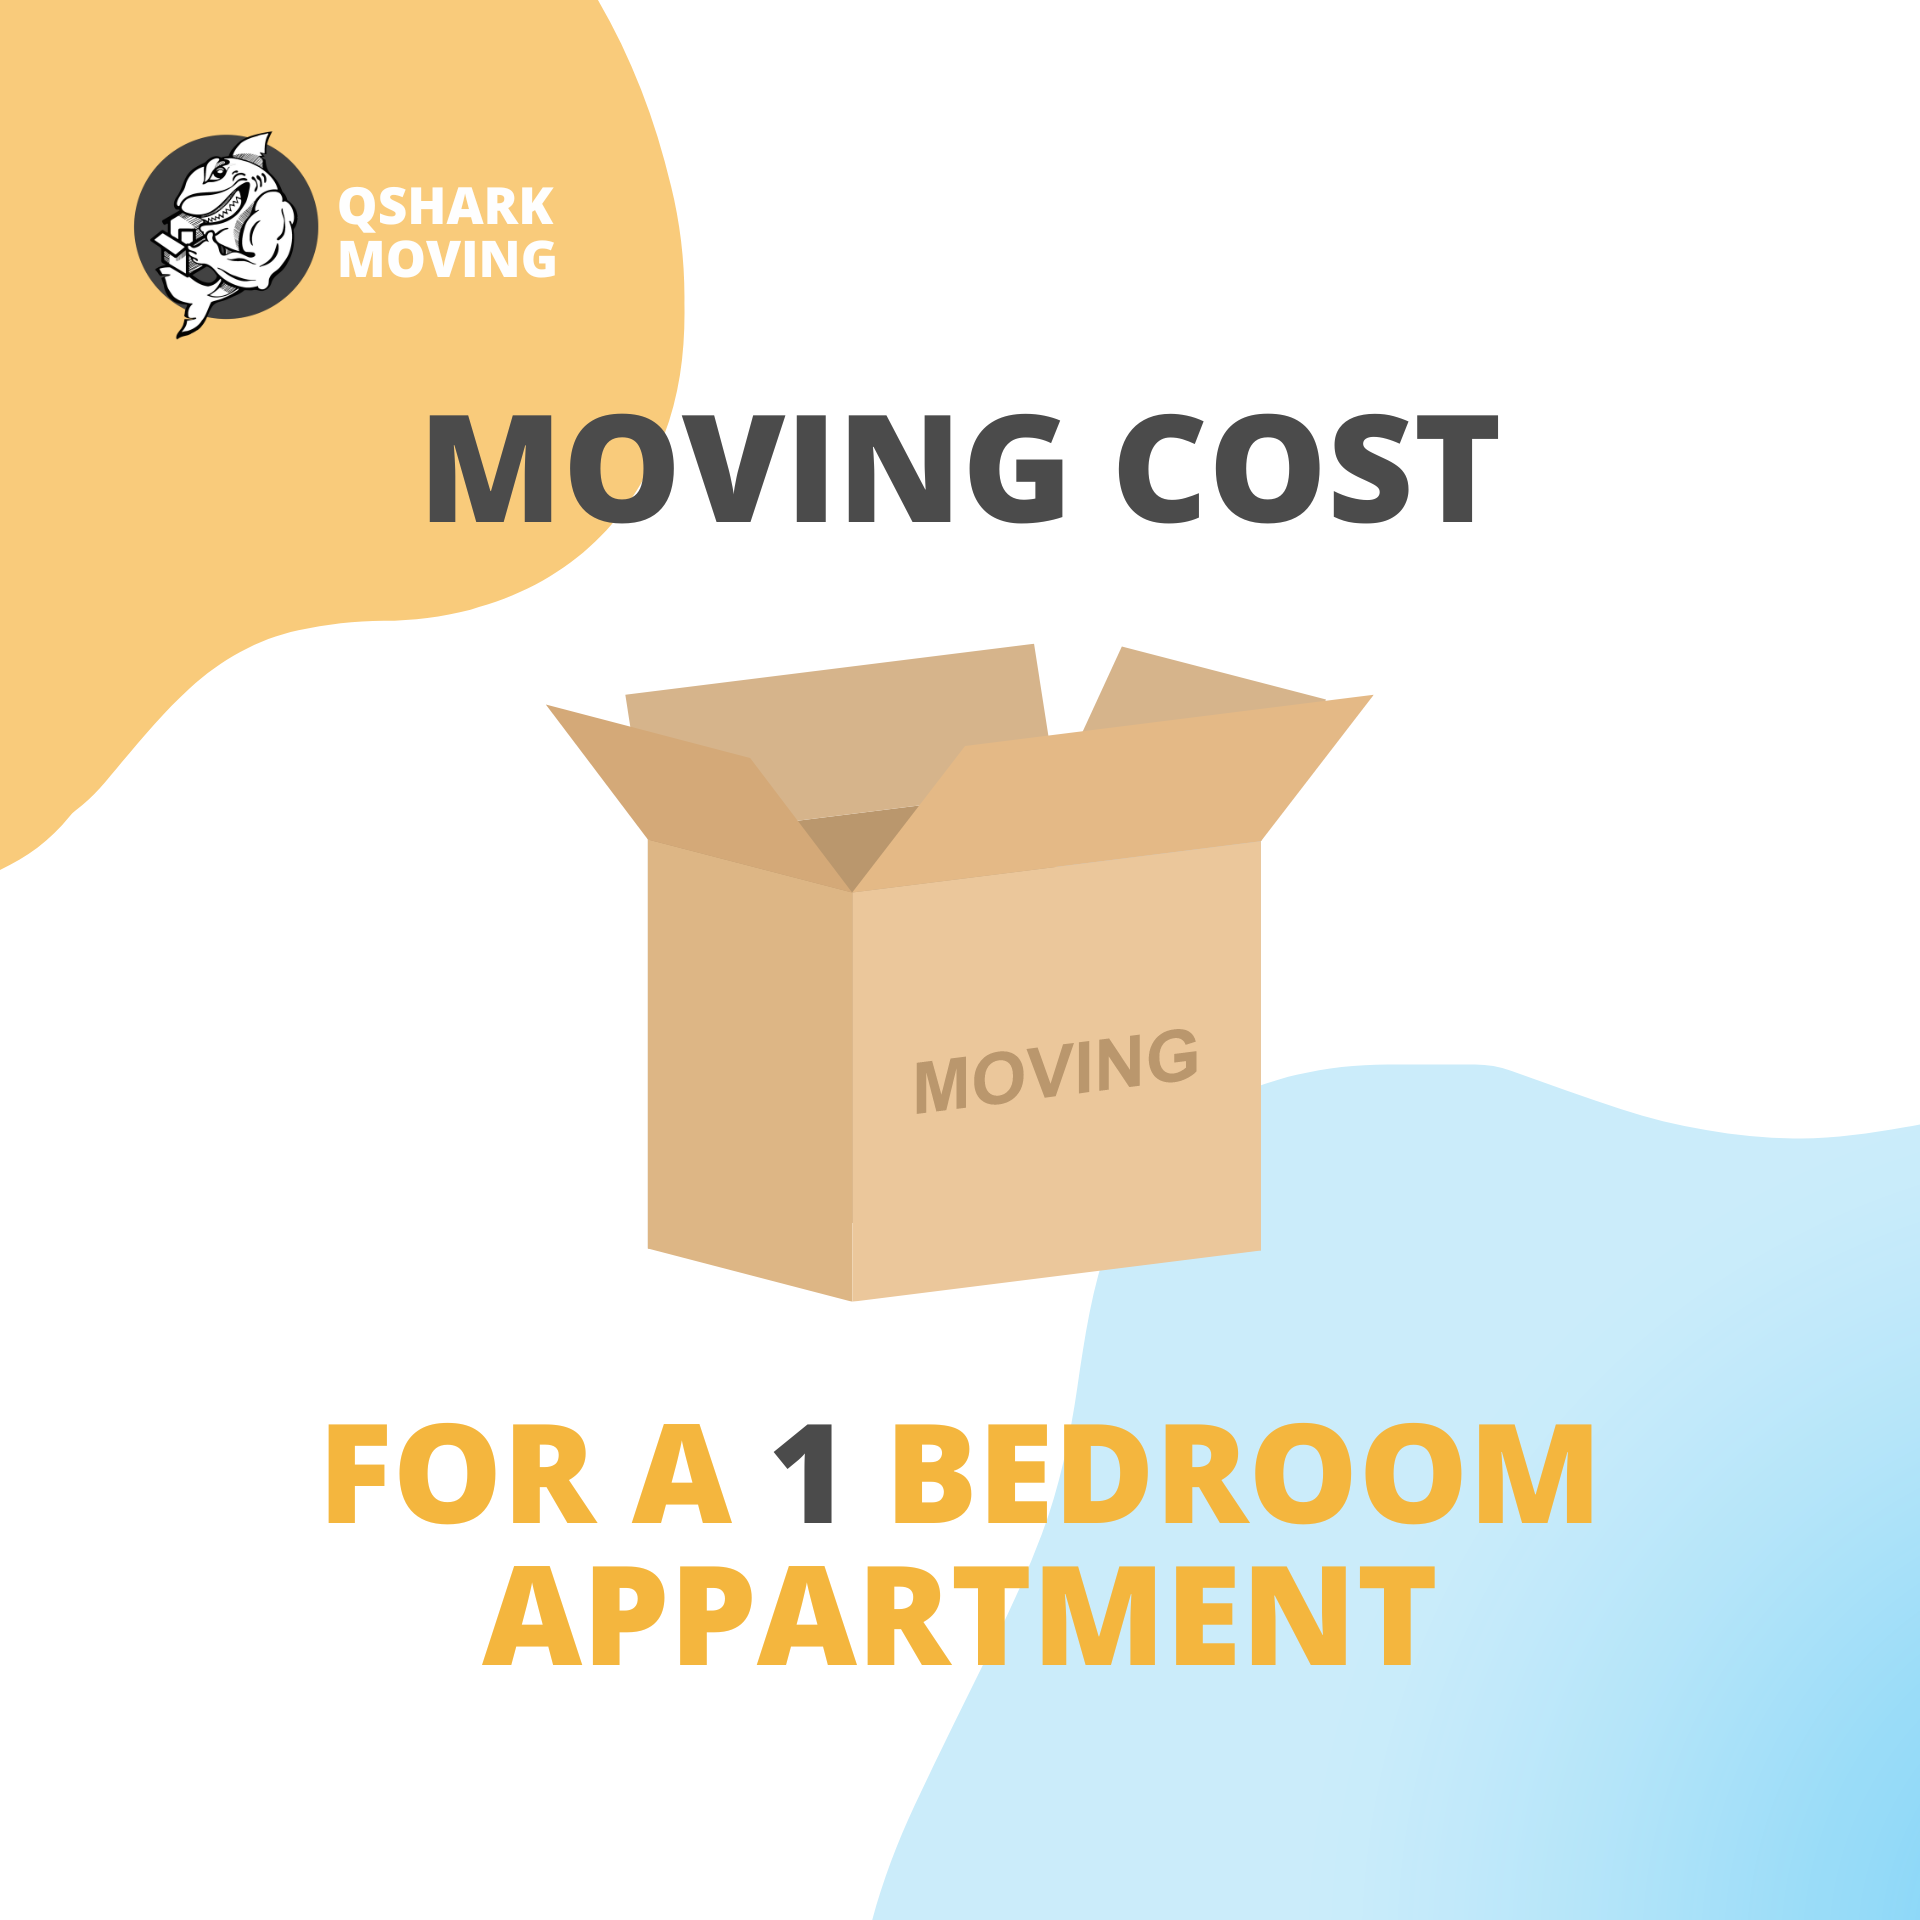 How Much Do Movers Cost for a 1 Bedroom Apartment: After 50000 Moves